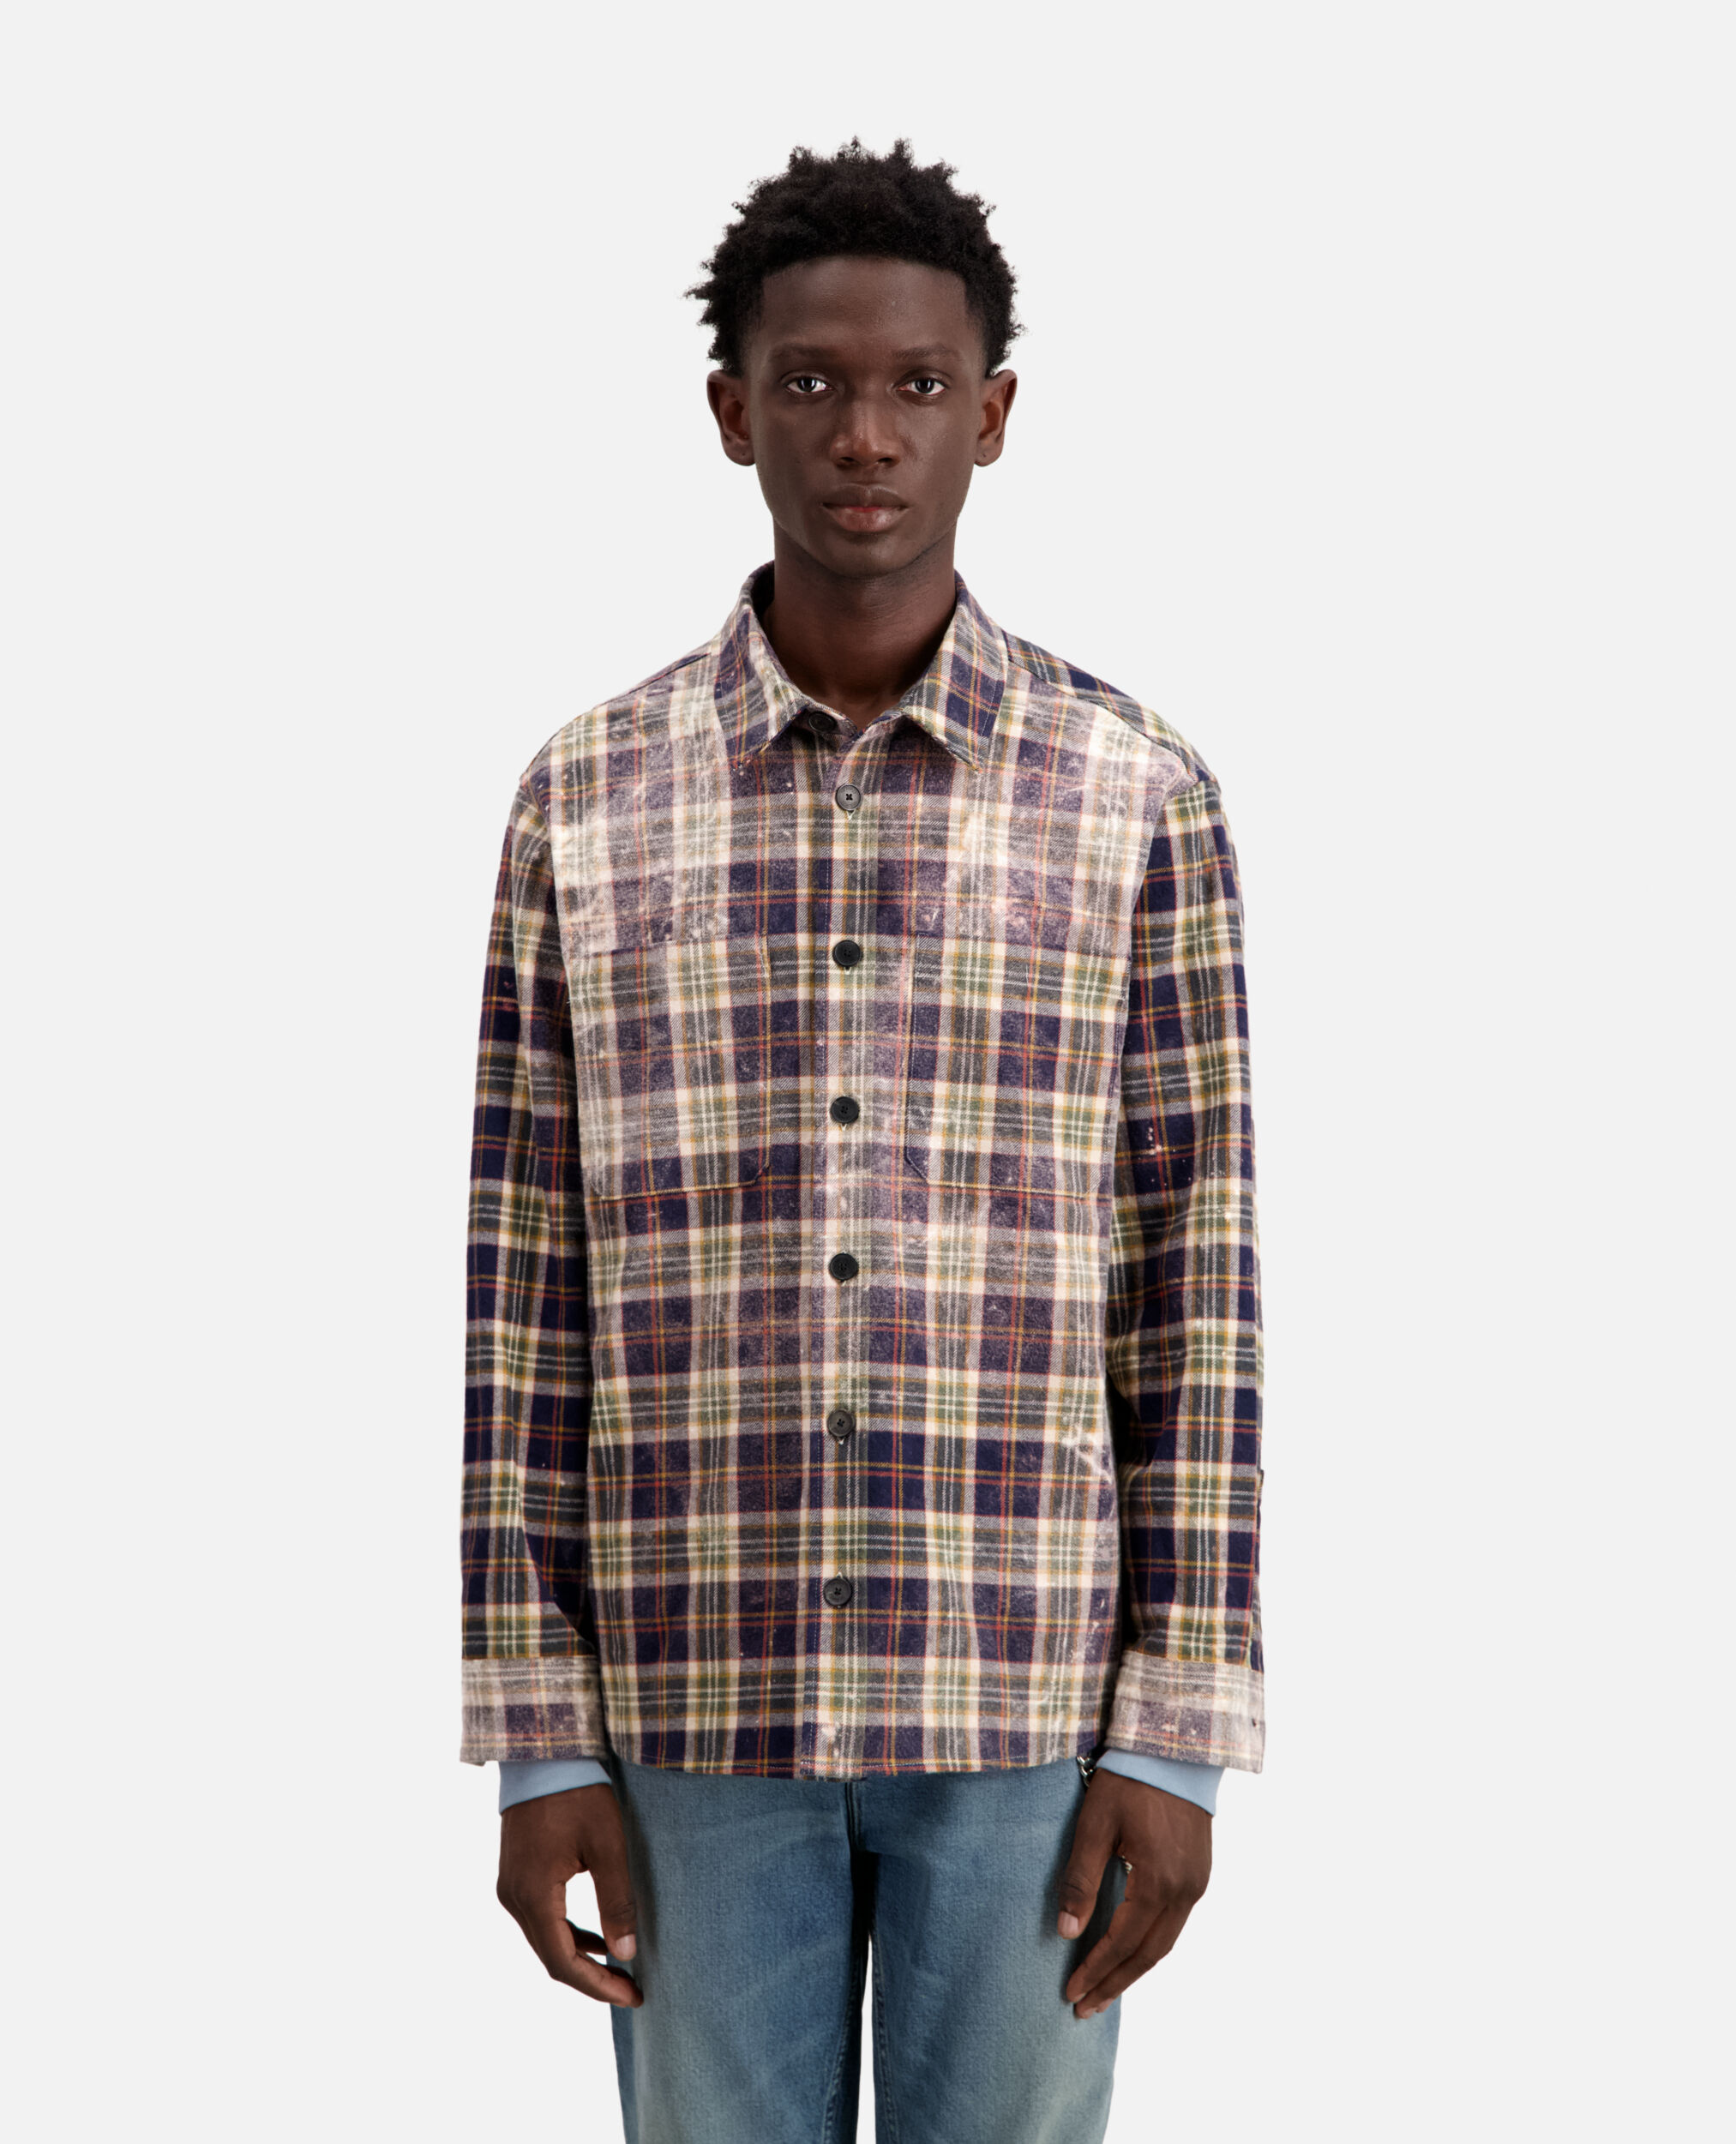 Blue and beige checked shirt, MIDDLE GREY ECRU, hi-res image number null